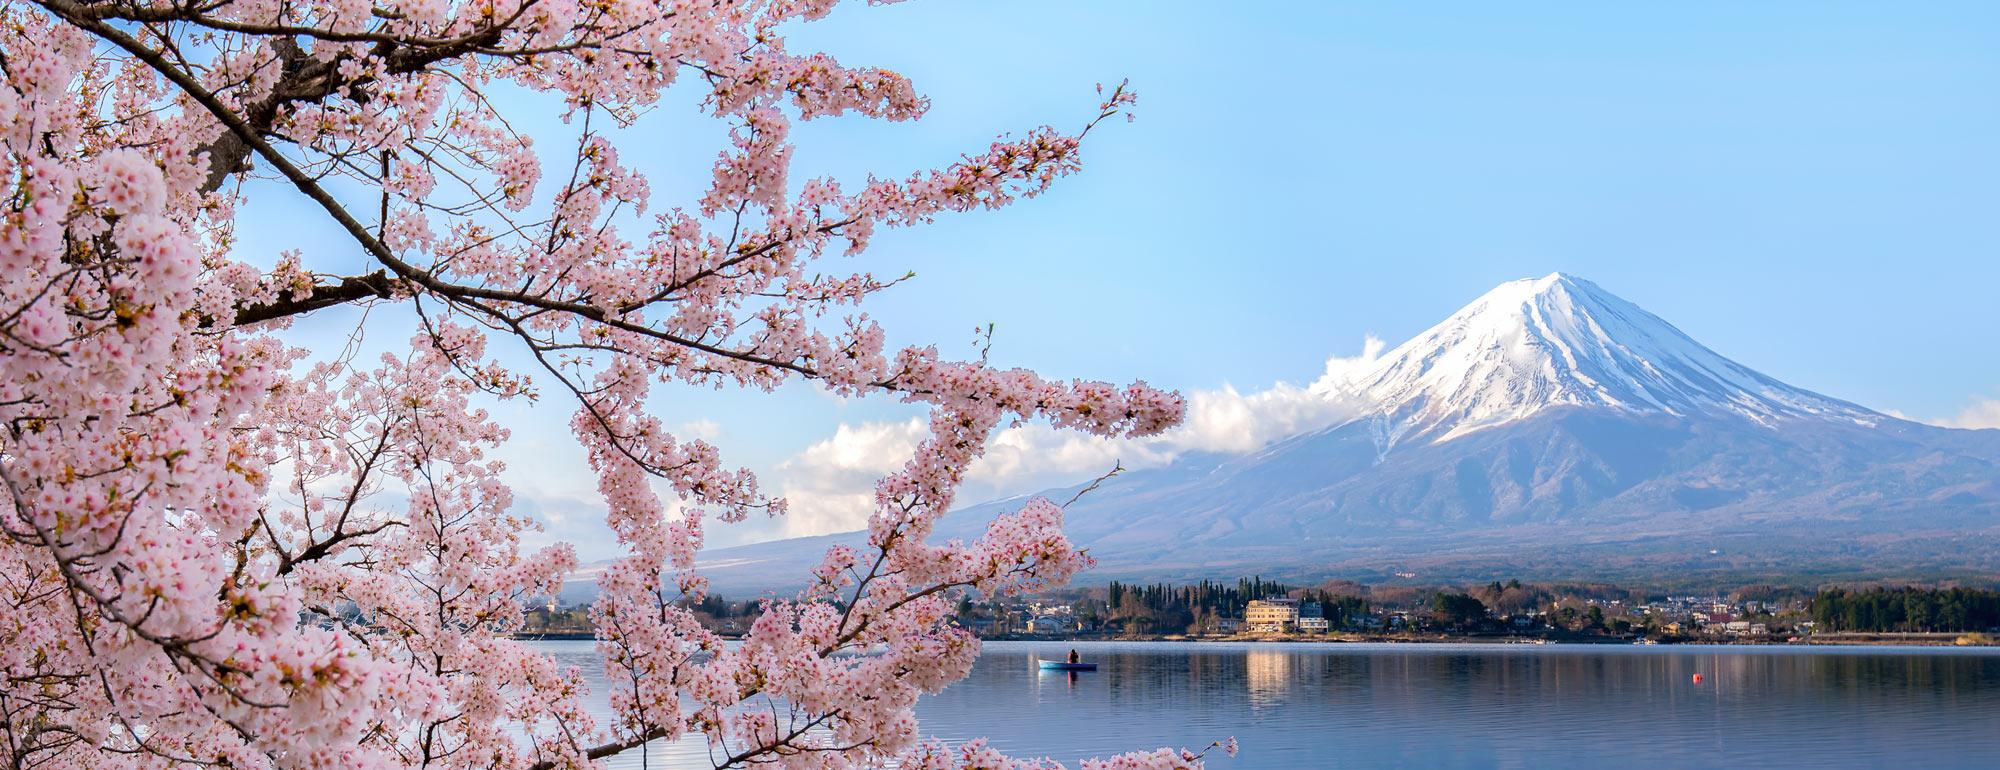 A view of cherry blossoms with Mt. Fuji in the background